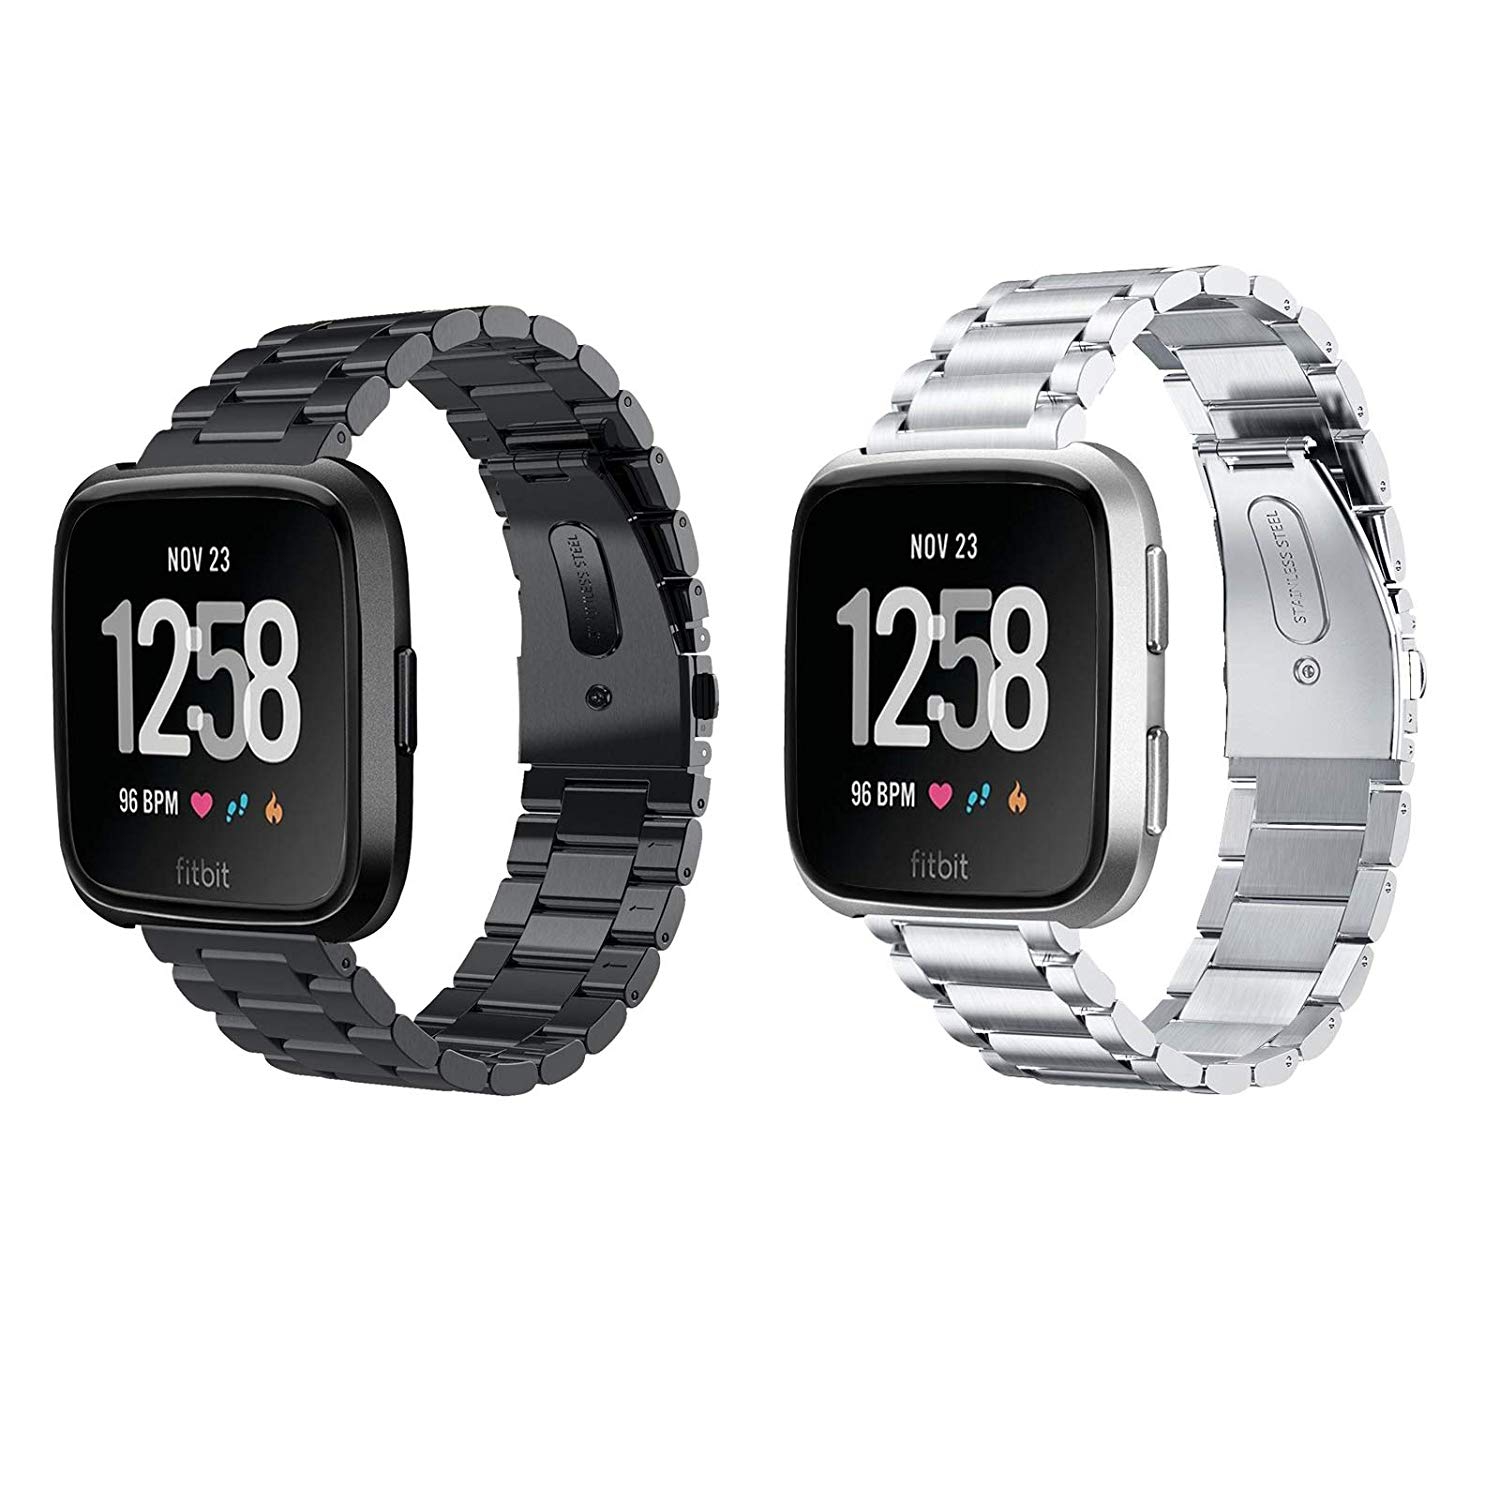 Compatible Fitbit Versa Bands Solid Stainless Steel Metal Replacement Fitbit Versa Smartwatch Band - Black/Silver